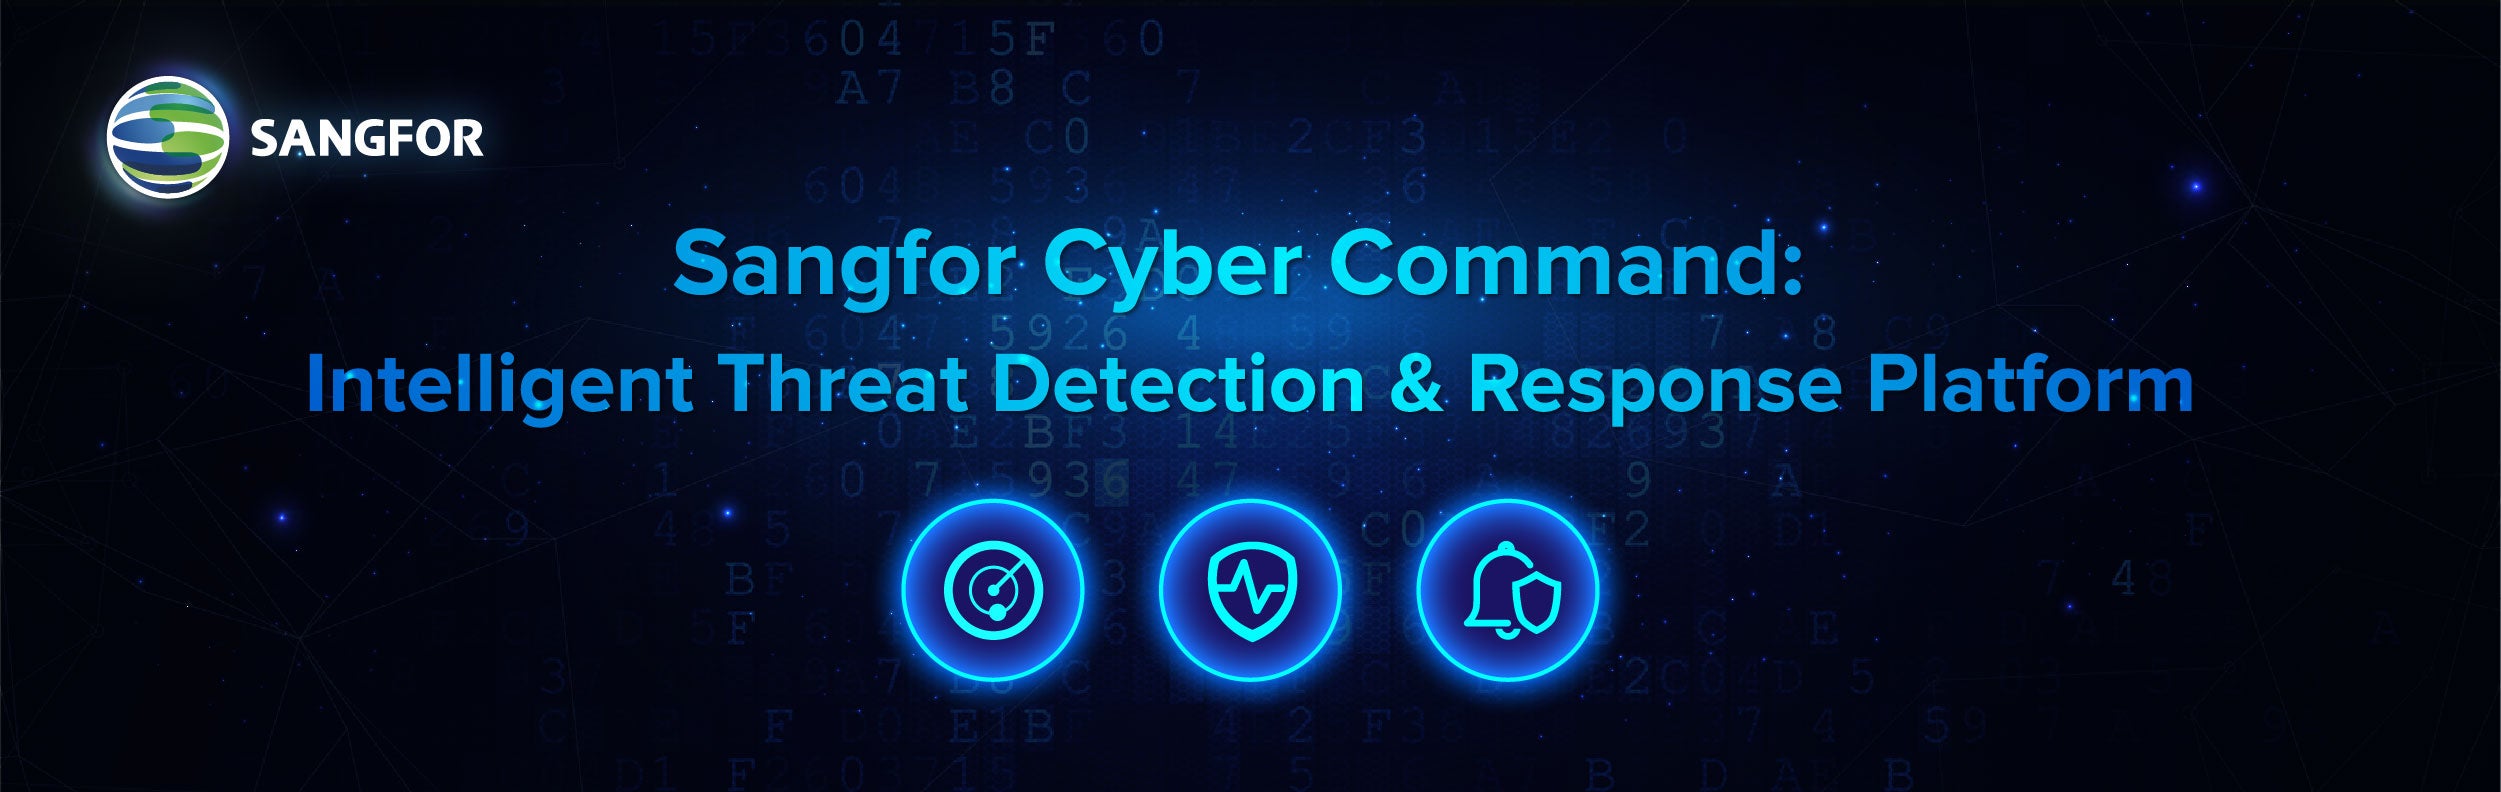 Sangfor Cyber Command Intelligent Threat Detection and Response Platform